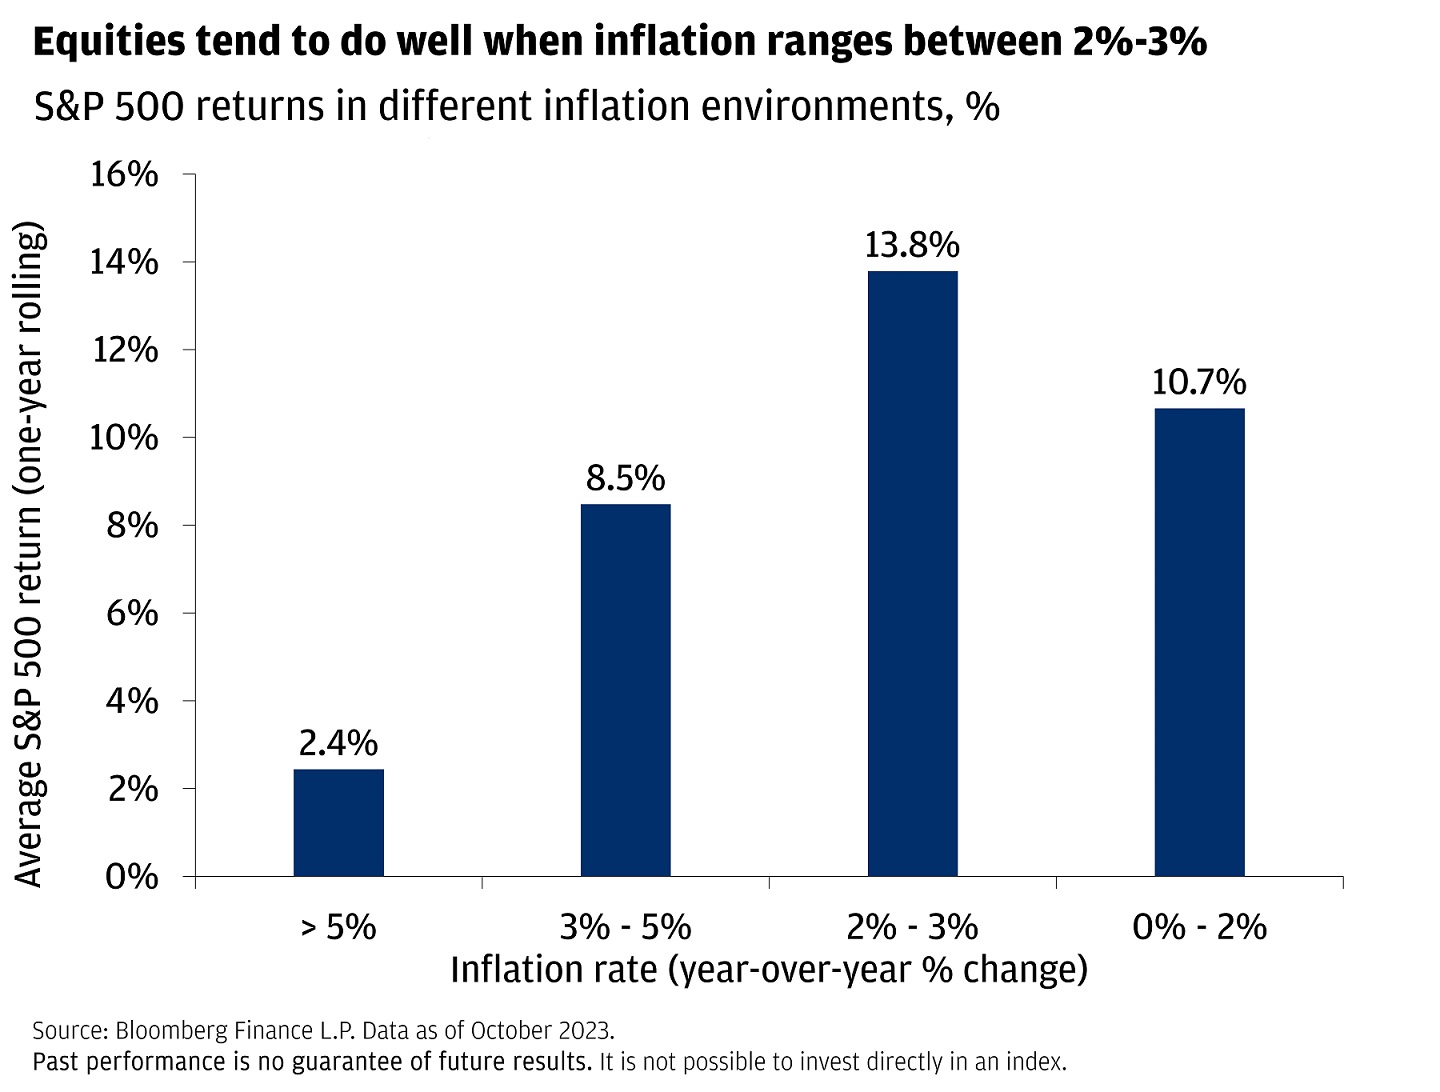 This bar graph shows S&P 500 year-over-year returns in different inflation environments.